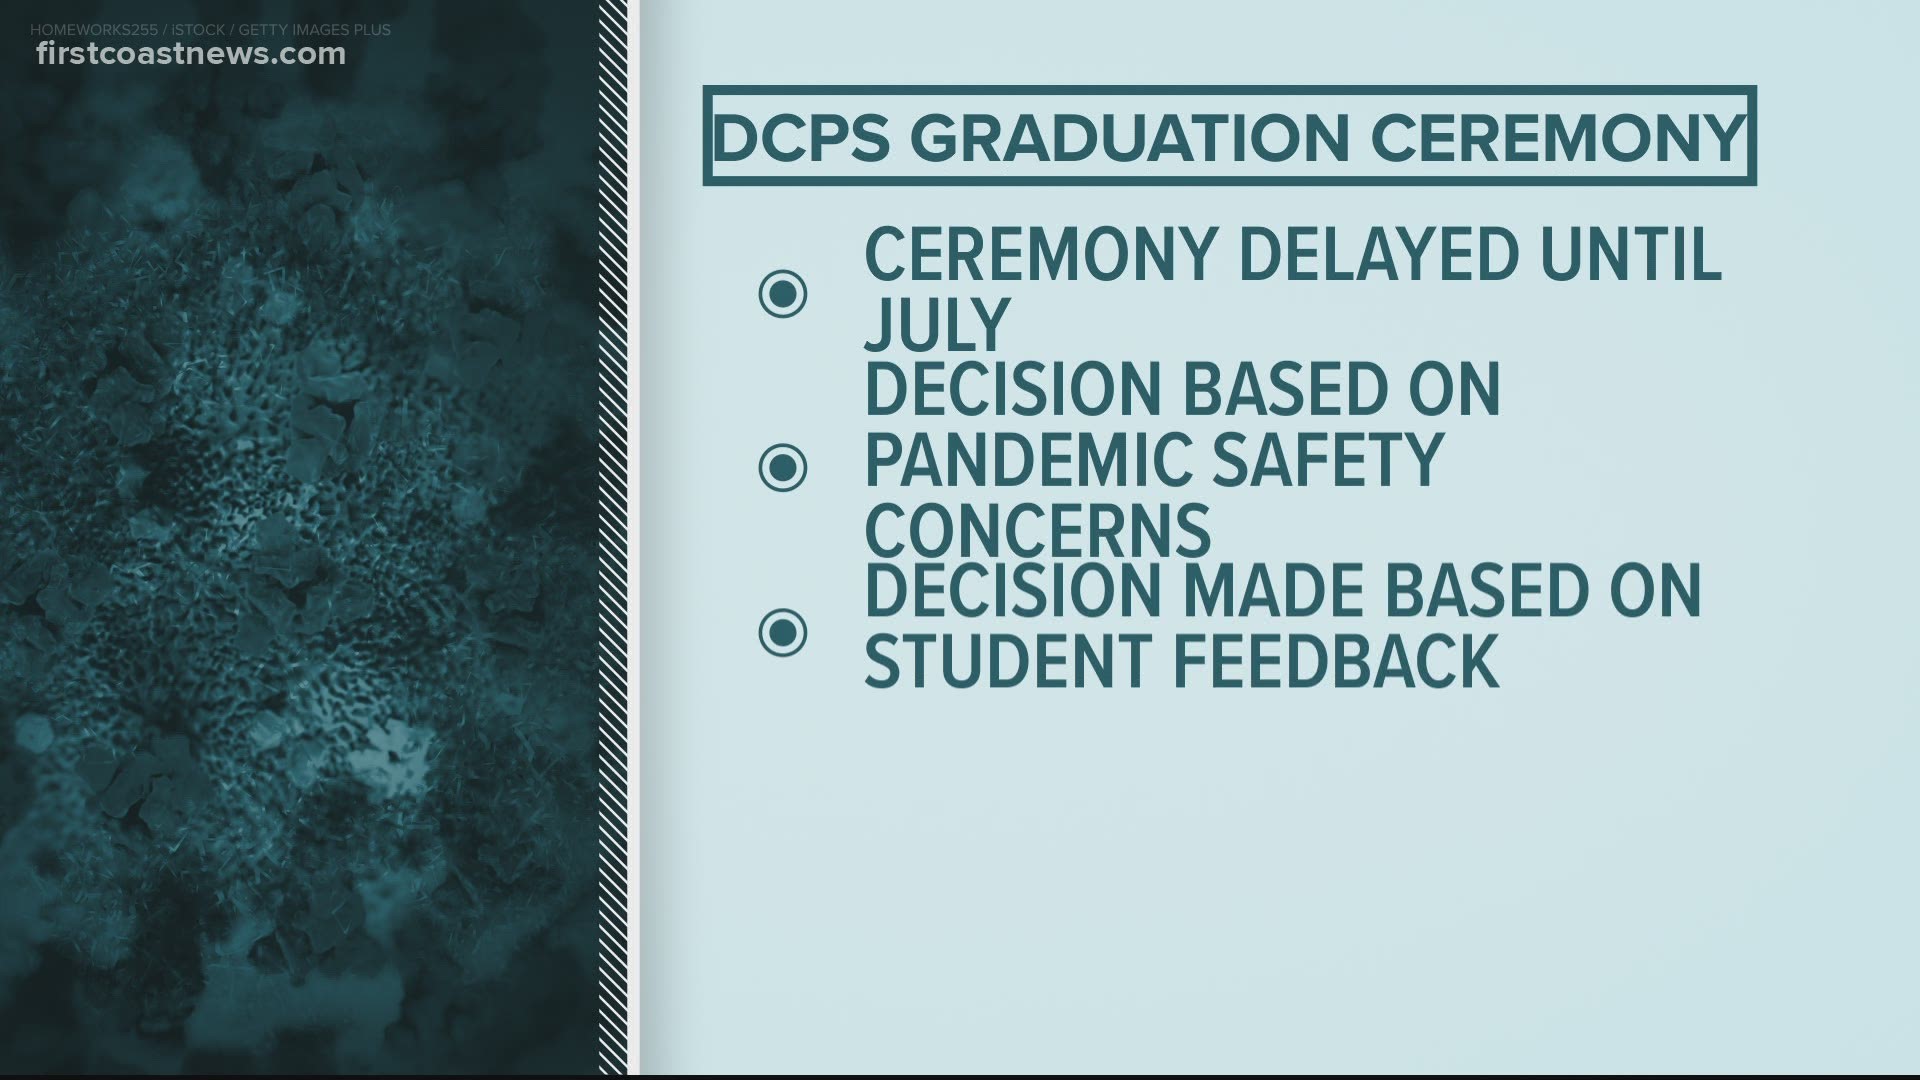 Duval County Public Schools seniors will have a traditional graduation ceremony postponed until July.